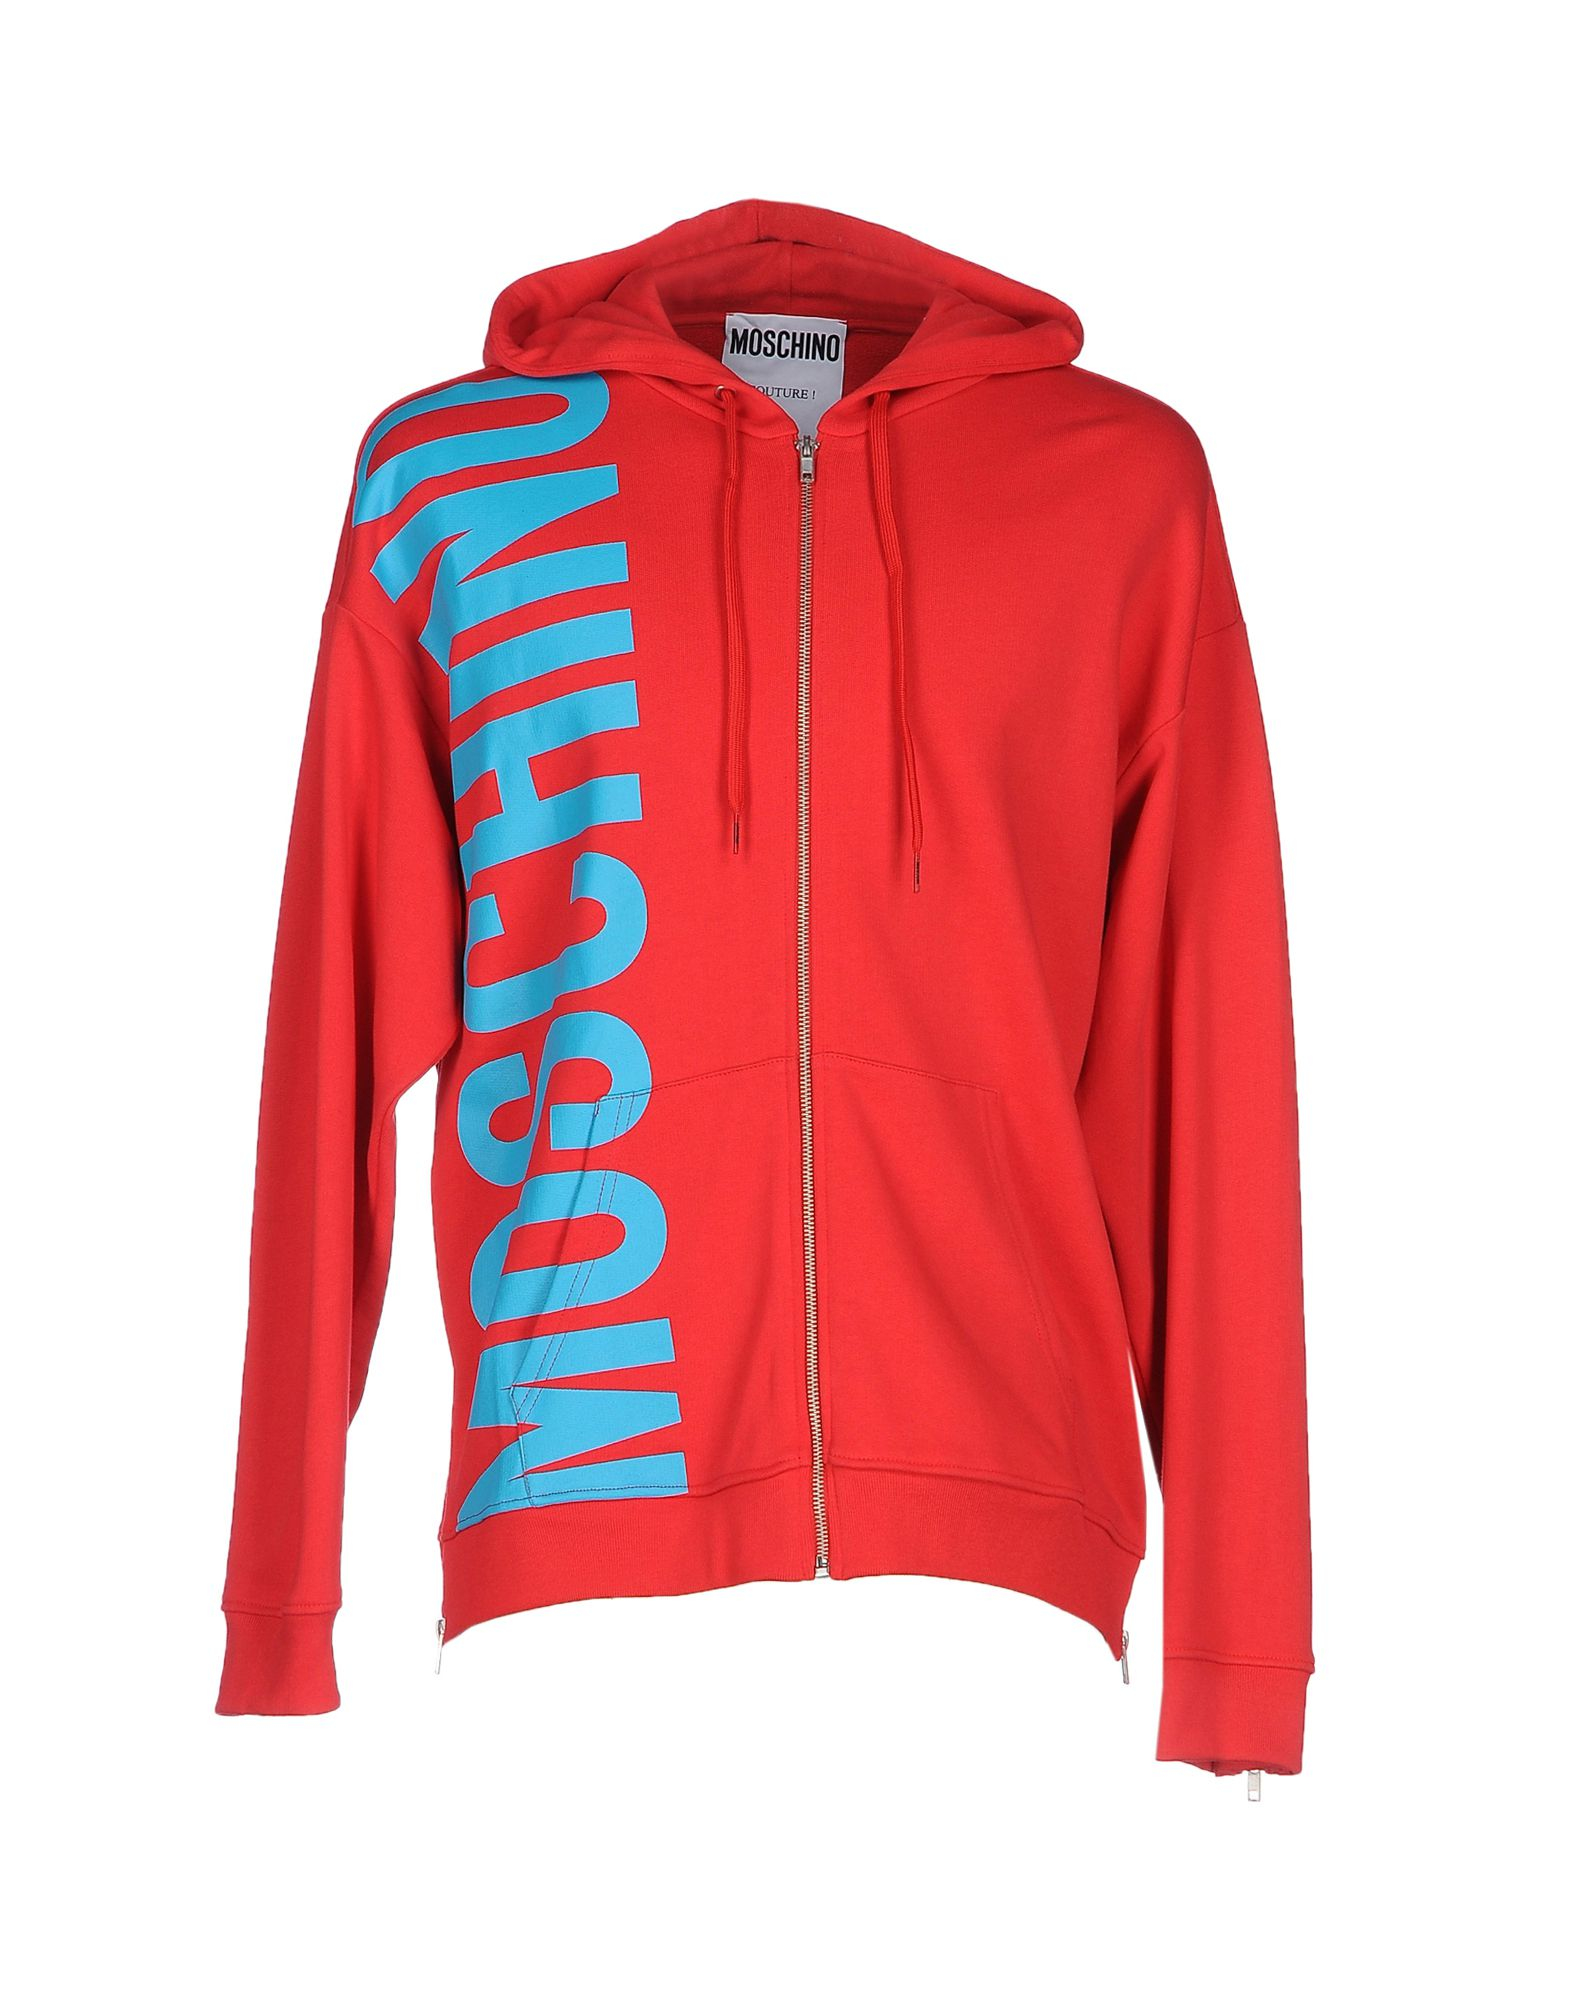 Lyst - Moschino Couture Sweatshirt in Red for Men